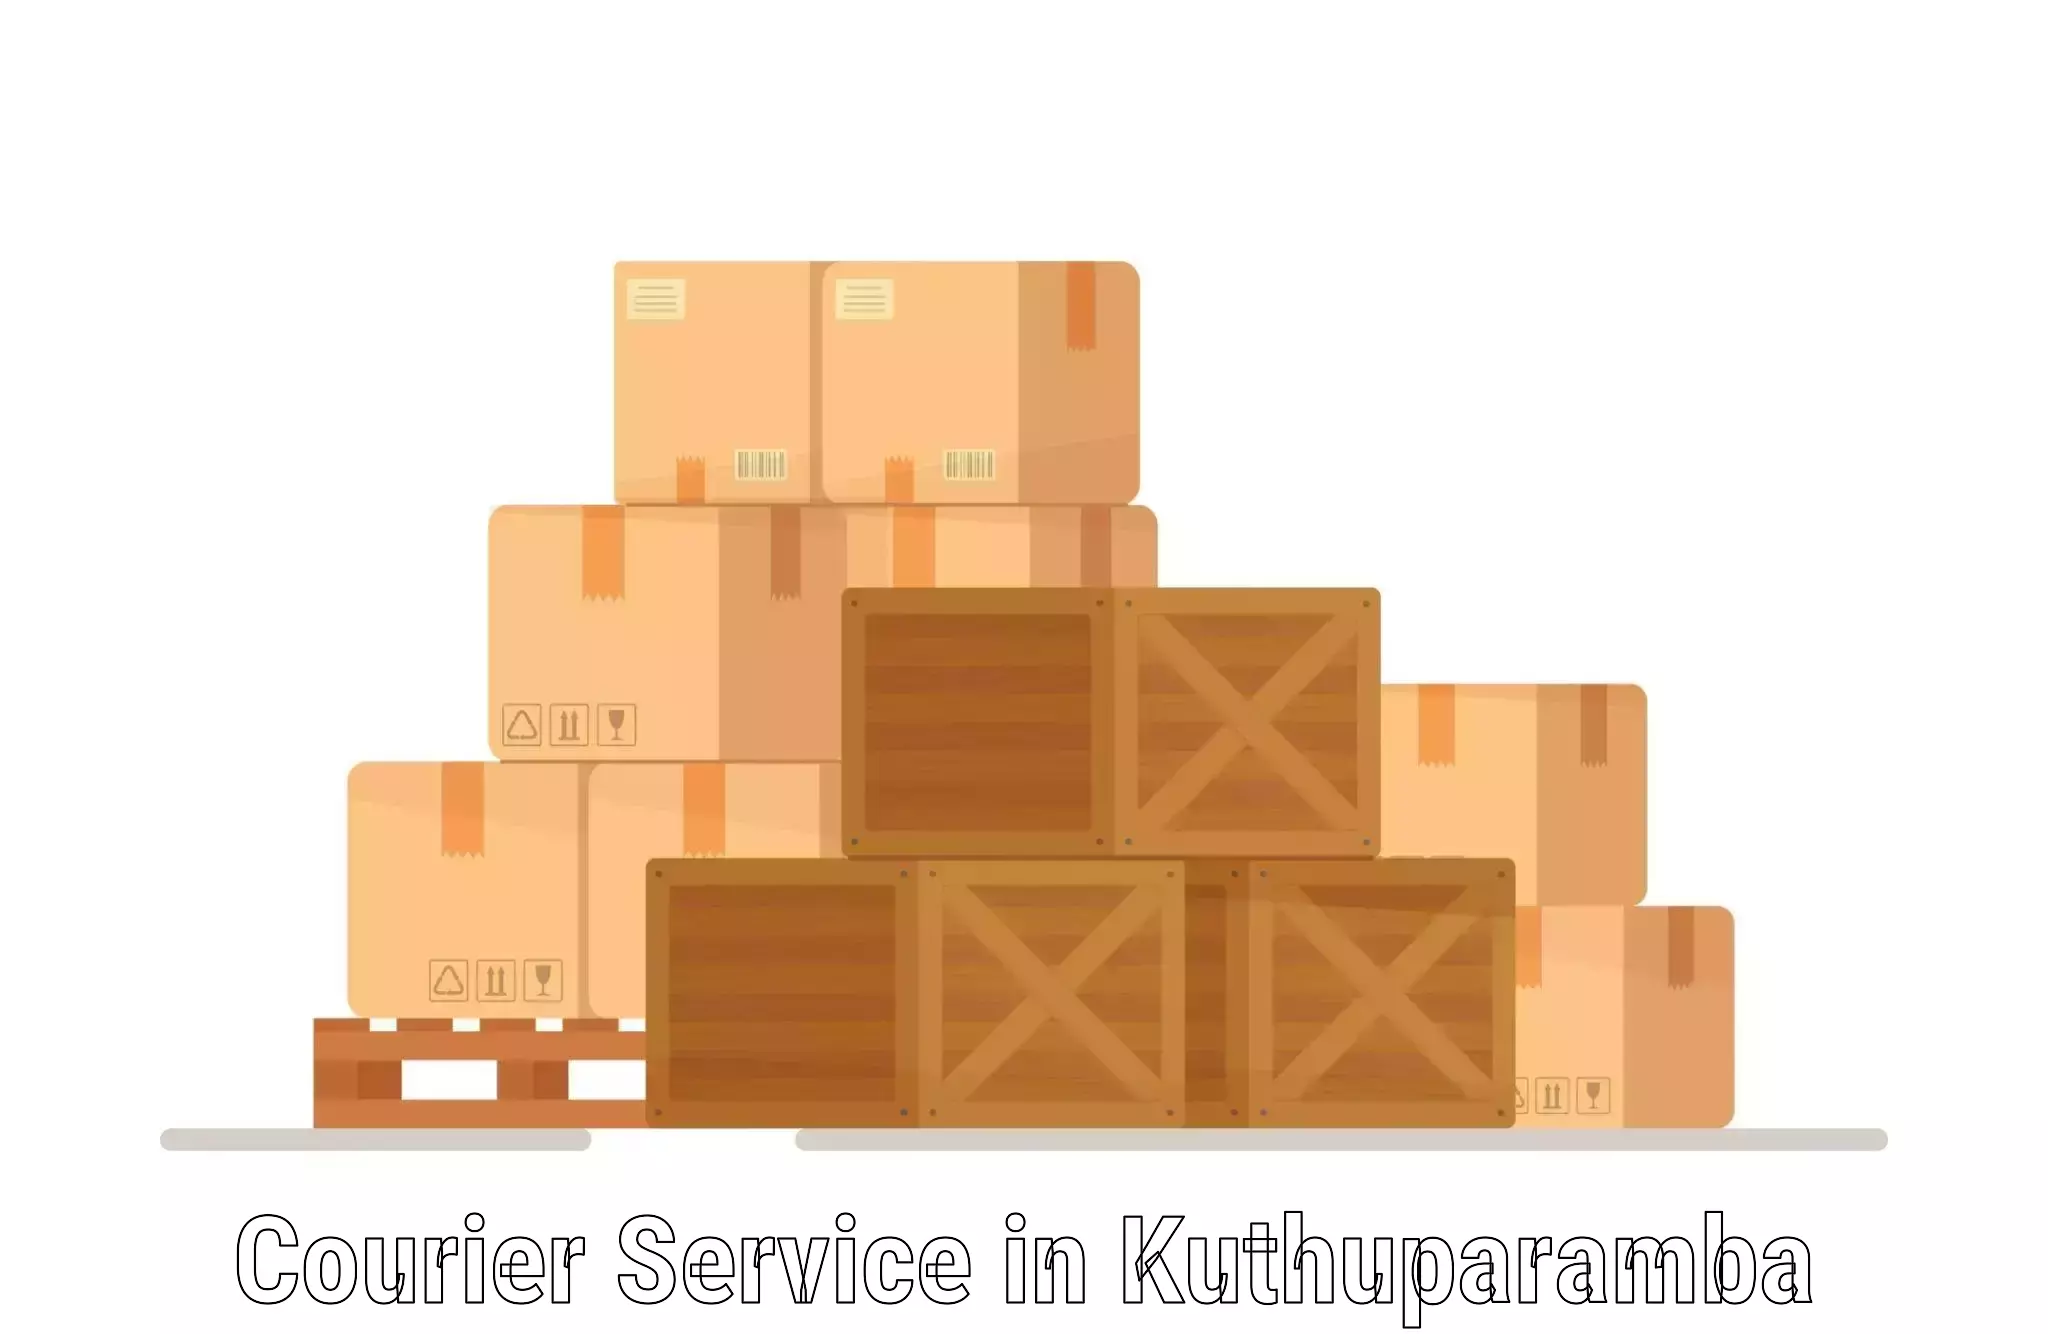 State-of-the-art courier technology in Kuthuparamba